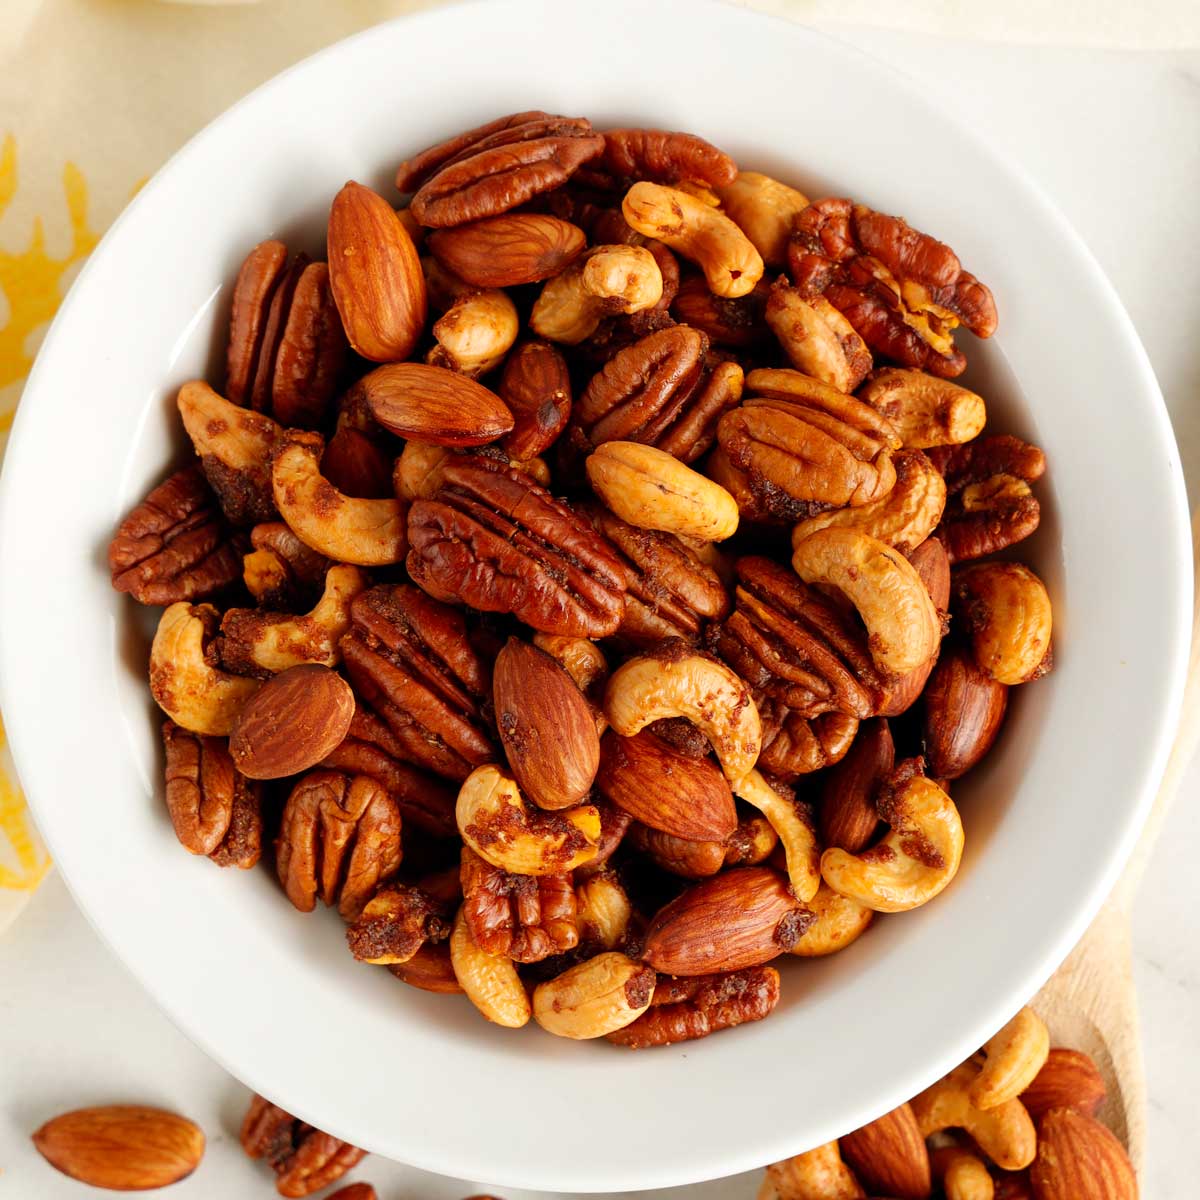 Spicy Nuts / Spicy Mixed Roasted Nuts